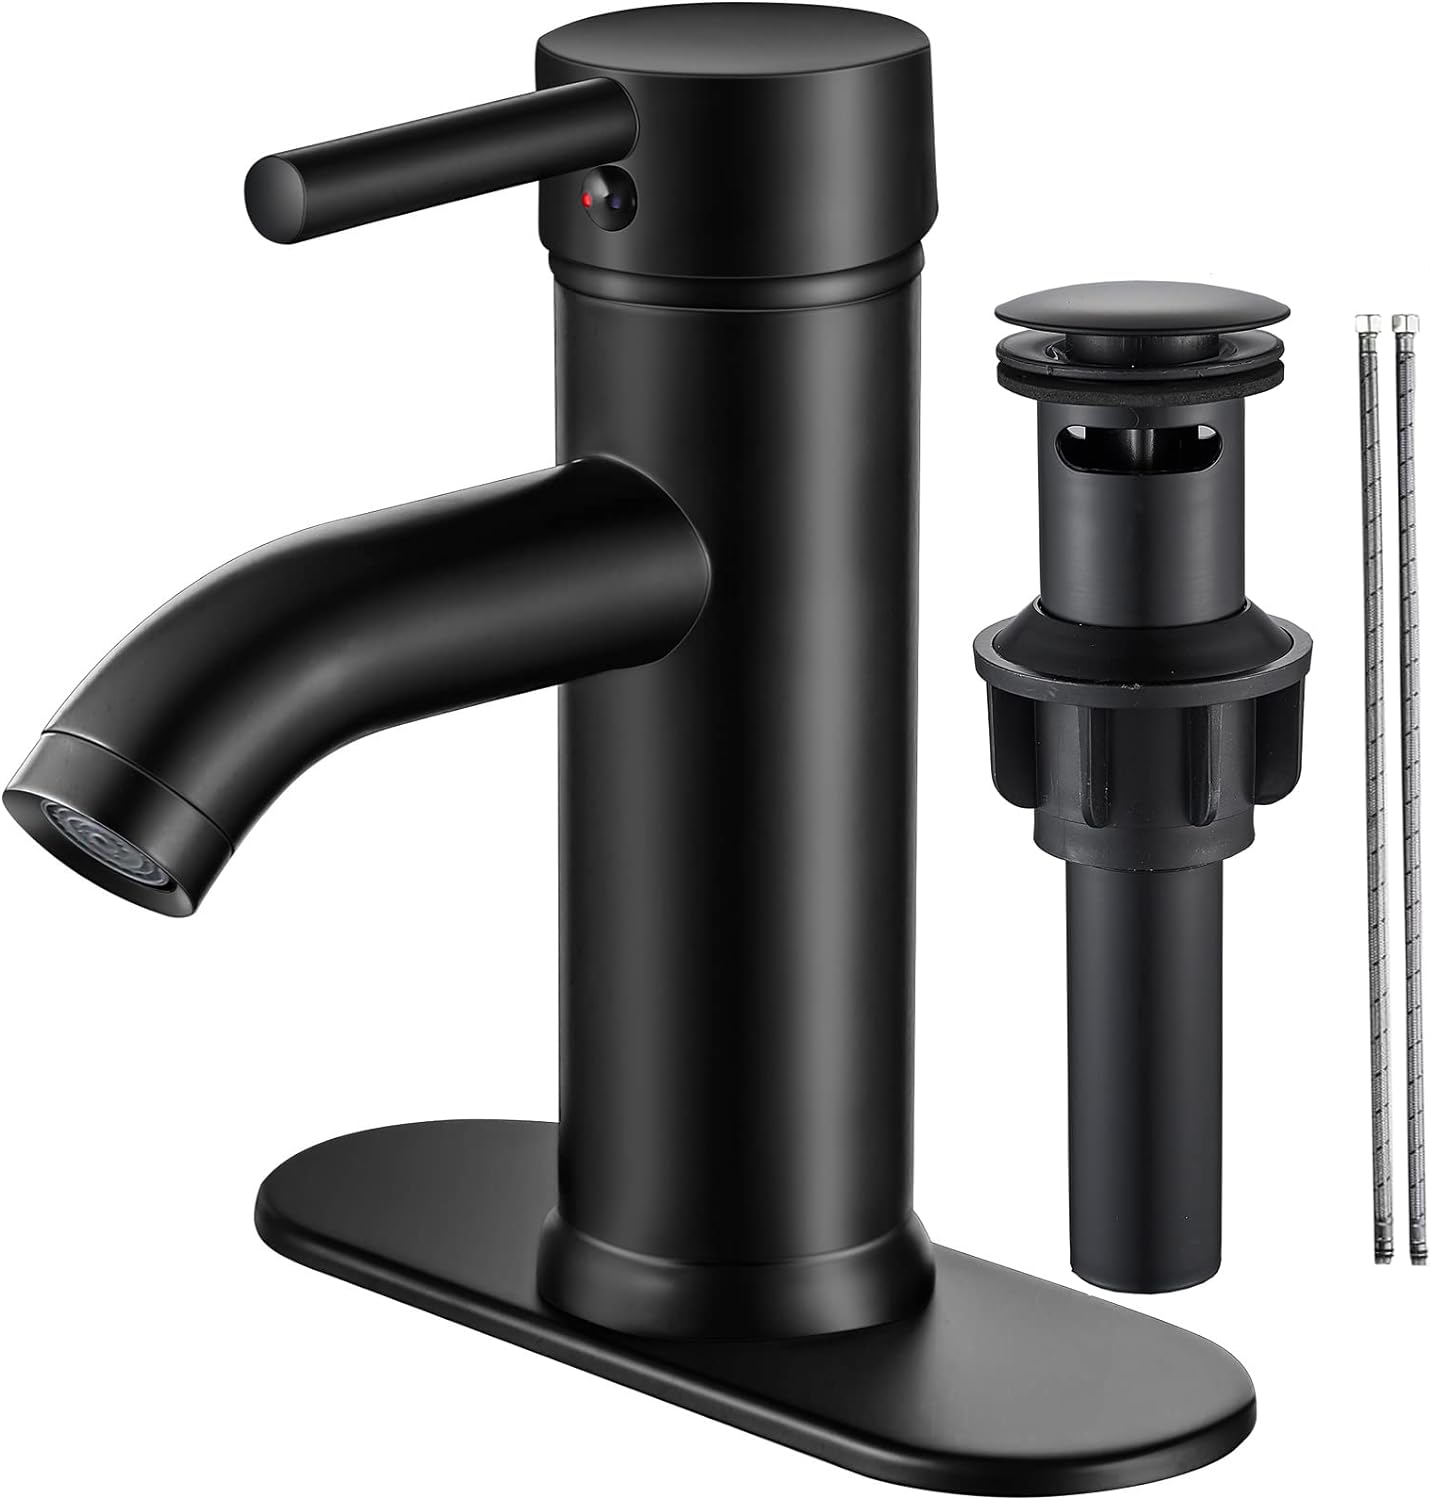 Great price and easy to install (my husband did it) We have a three whole sink but this one worked well. We changed from a silver faucet to this black one and the difference is huge! It looks so nice.